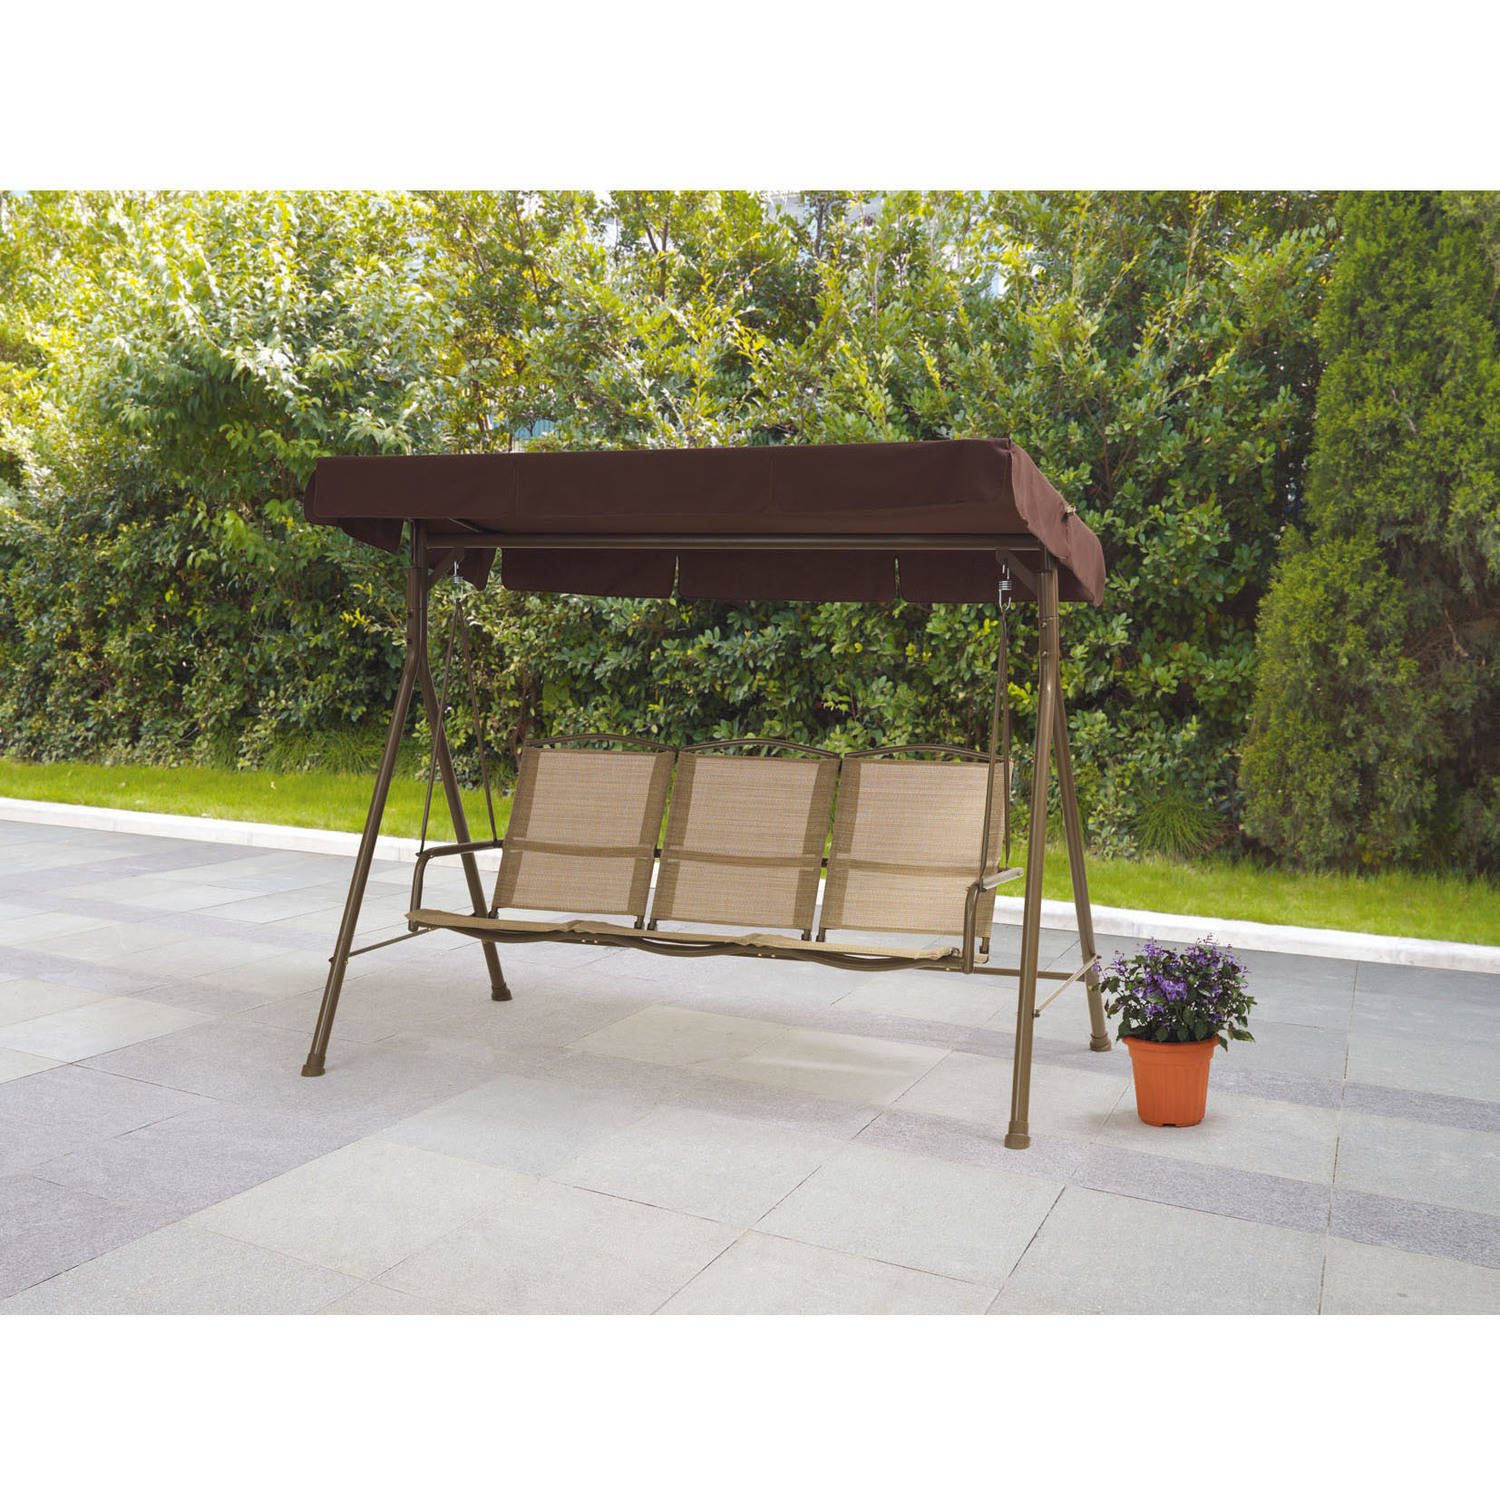 Mainstays Sand Dune 3-Person Outdoor Sling Canopy Porch Swing with Canopy, Dune - image 1 of 6